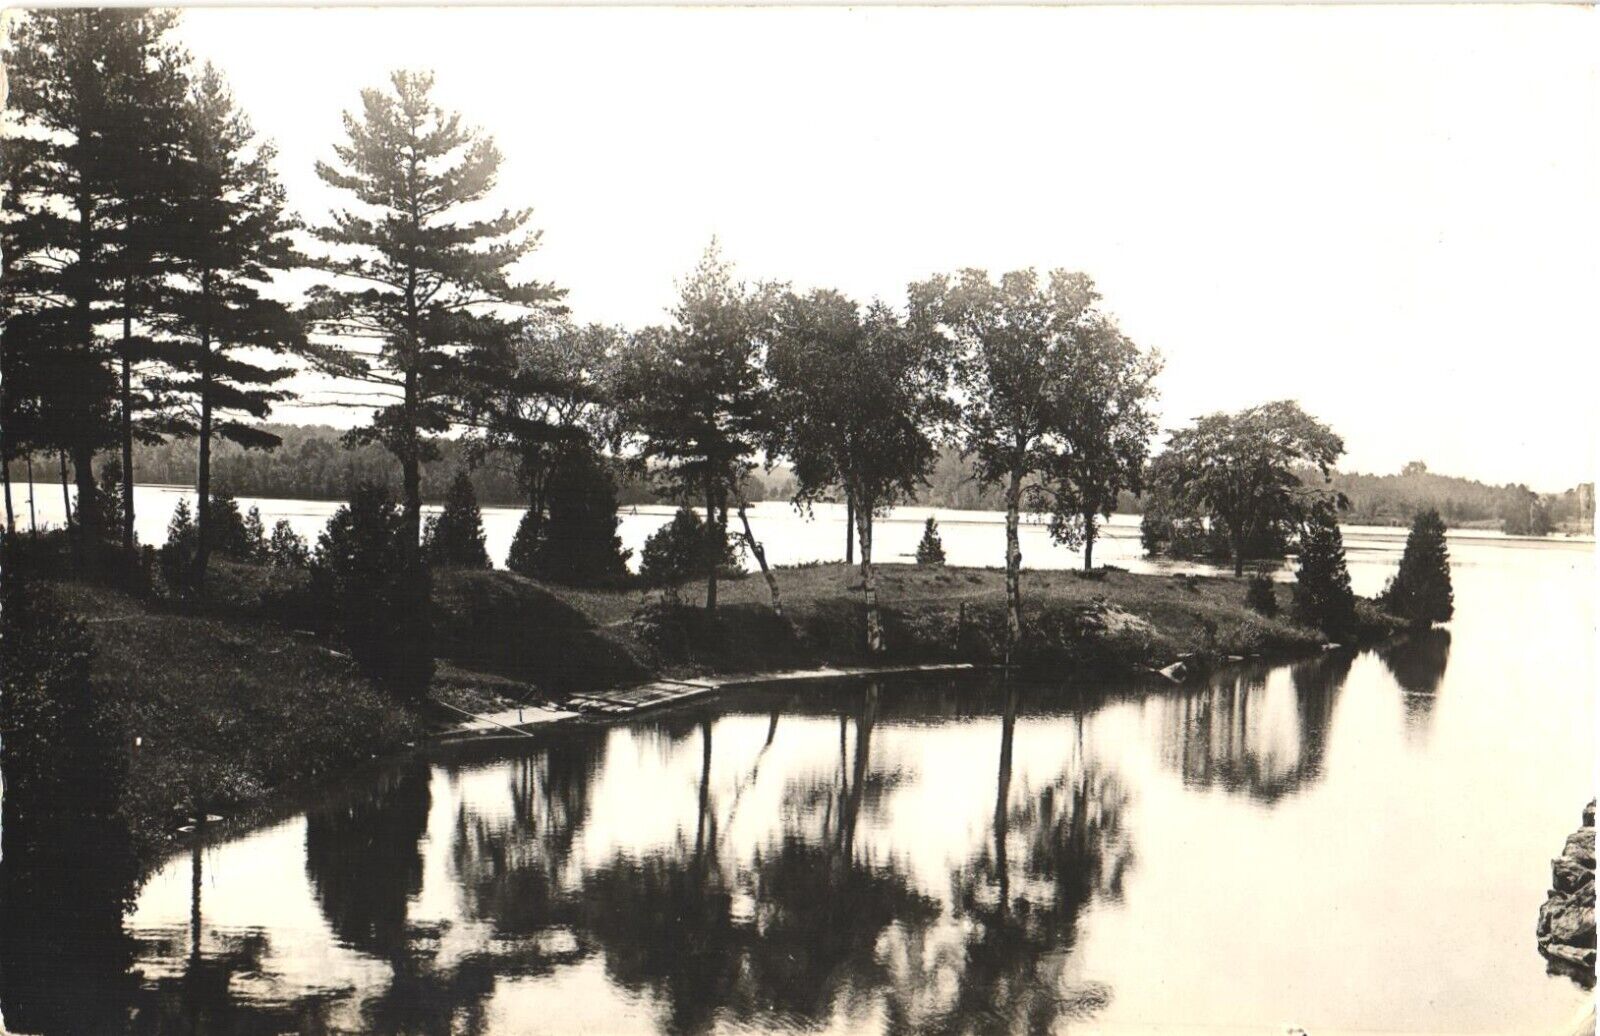 An Old Photograph of Beautiful Trees On A Serene Lake Postcard